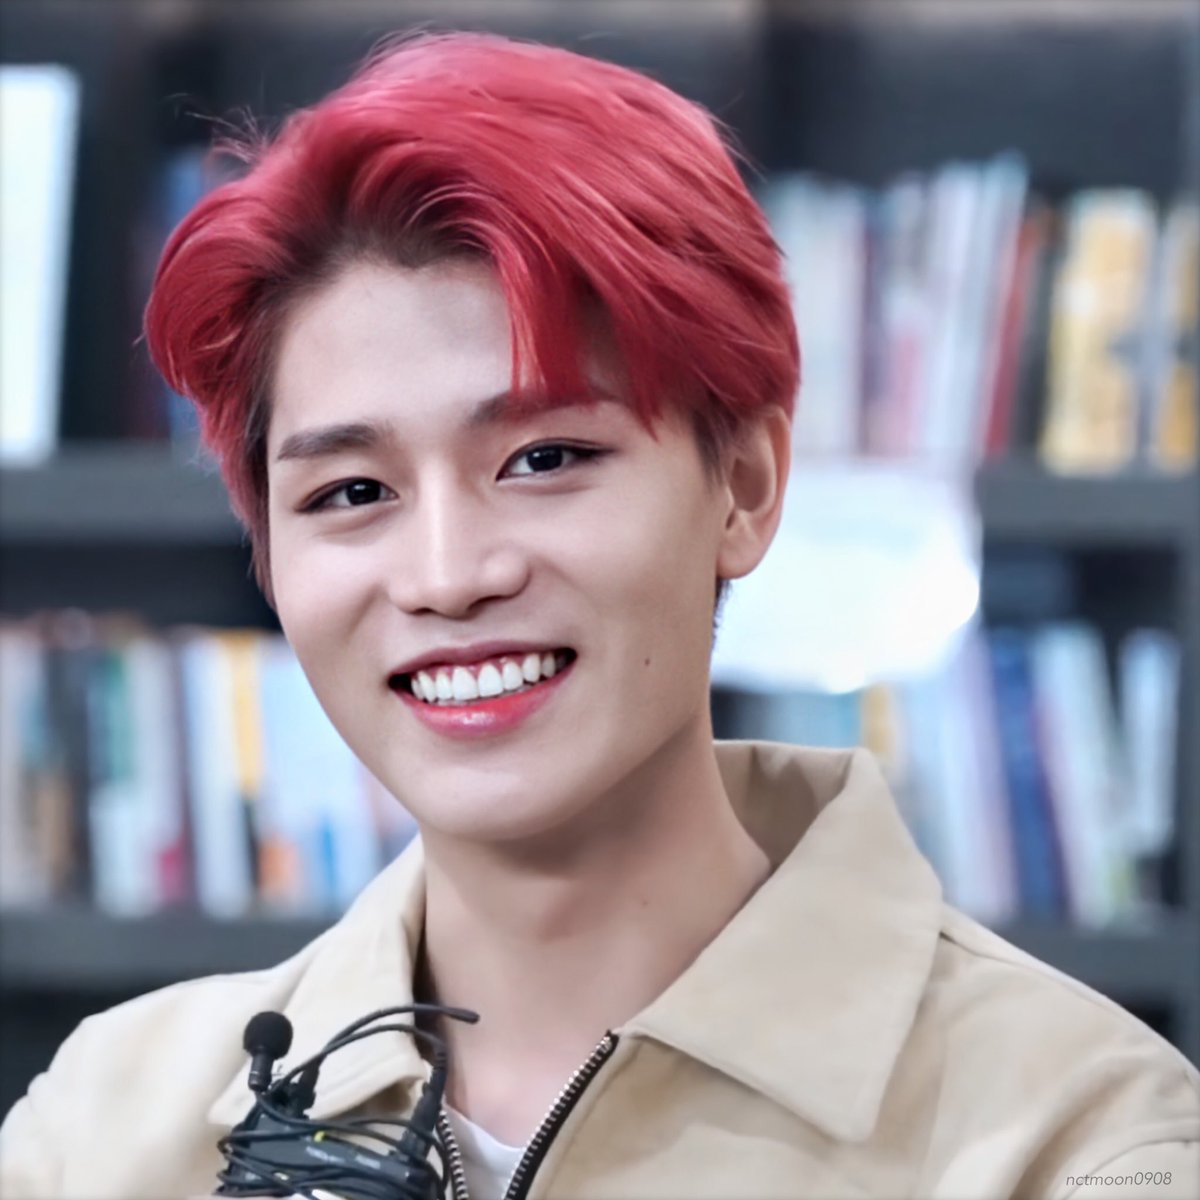 8. taeil his central incisors stand out quite a bit which is nice. i like the shape of his premolars so much ohmygod his premolars also stand out almost as much as his central incisors and from some angles maybe more. his premolars stick out at the top and are angles back omfg